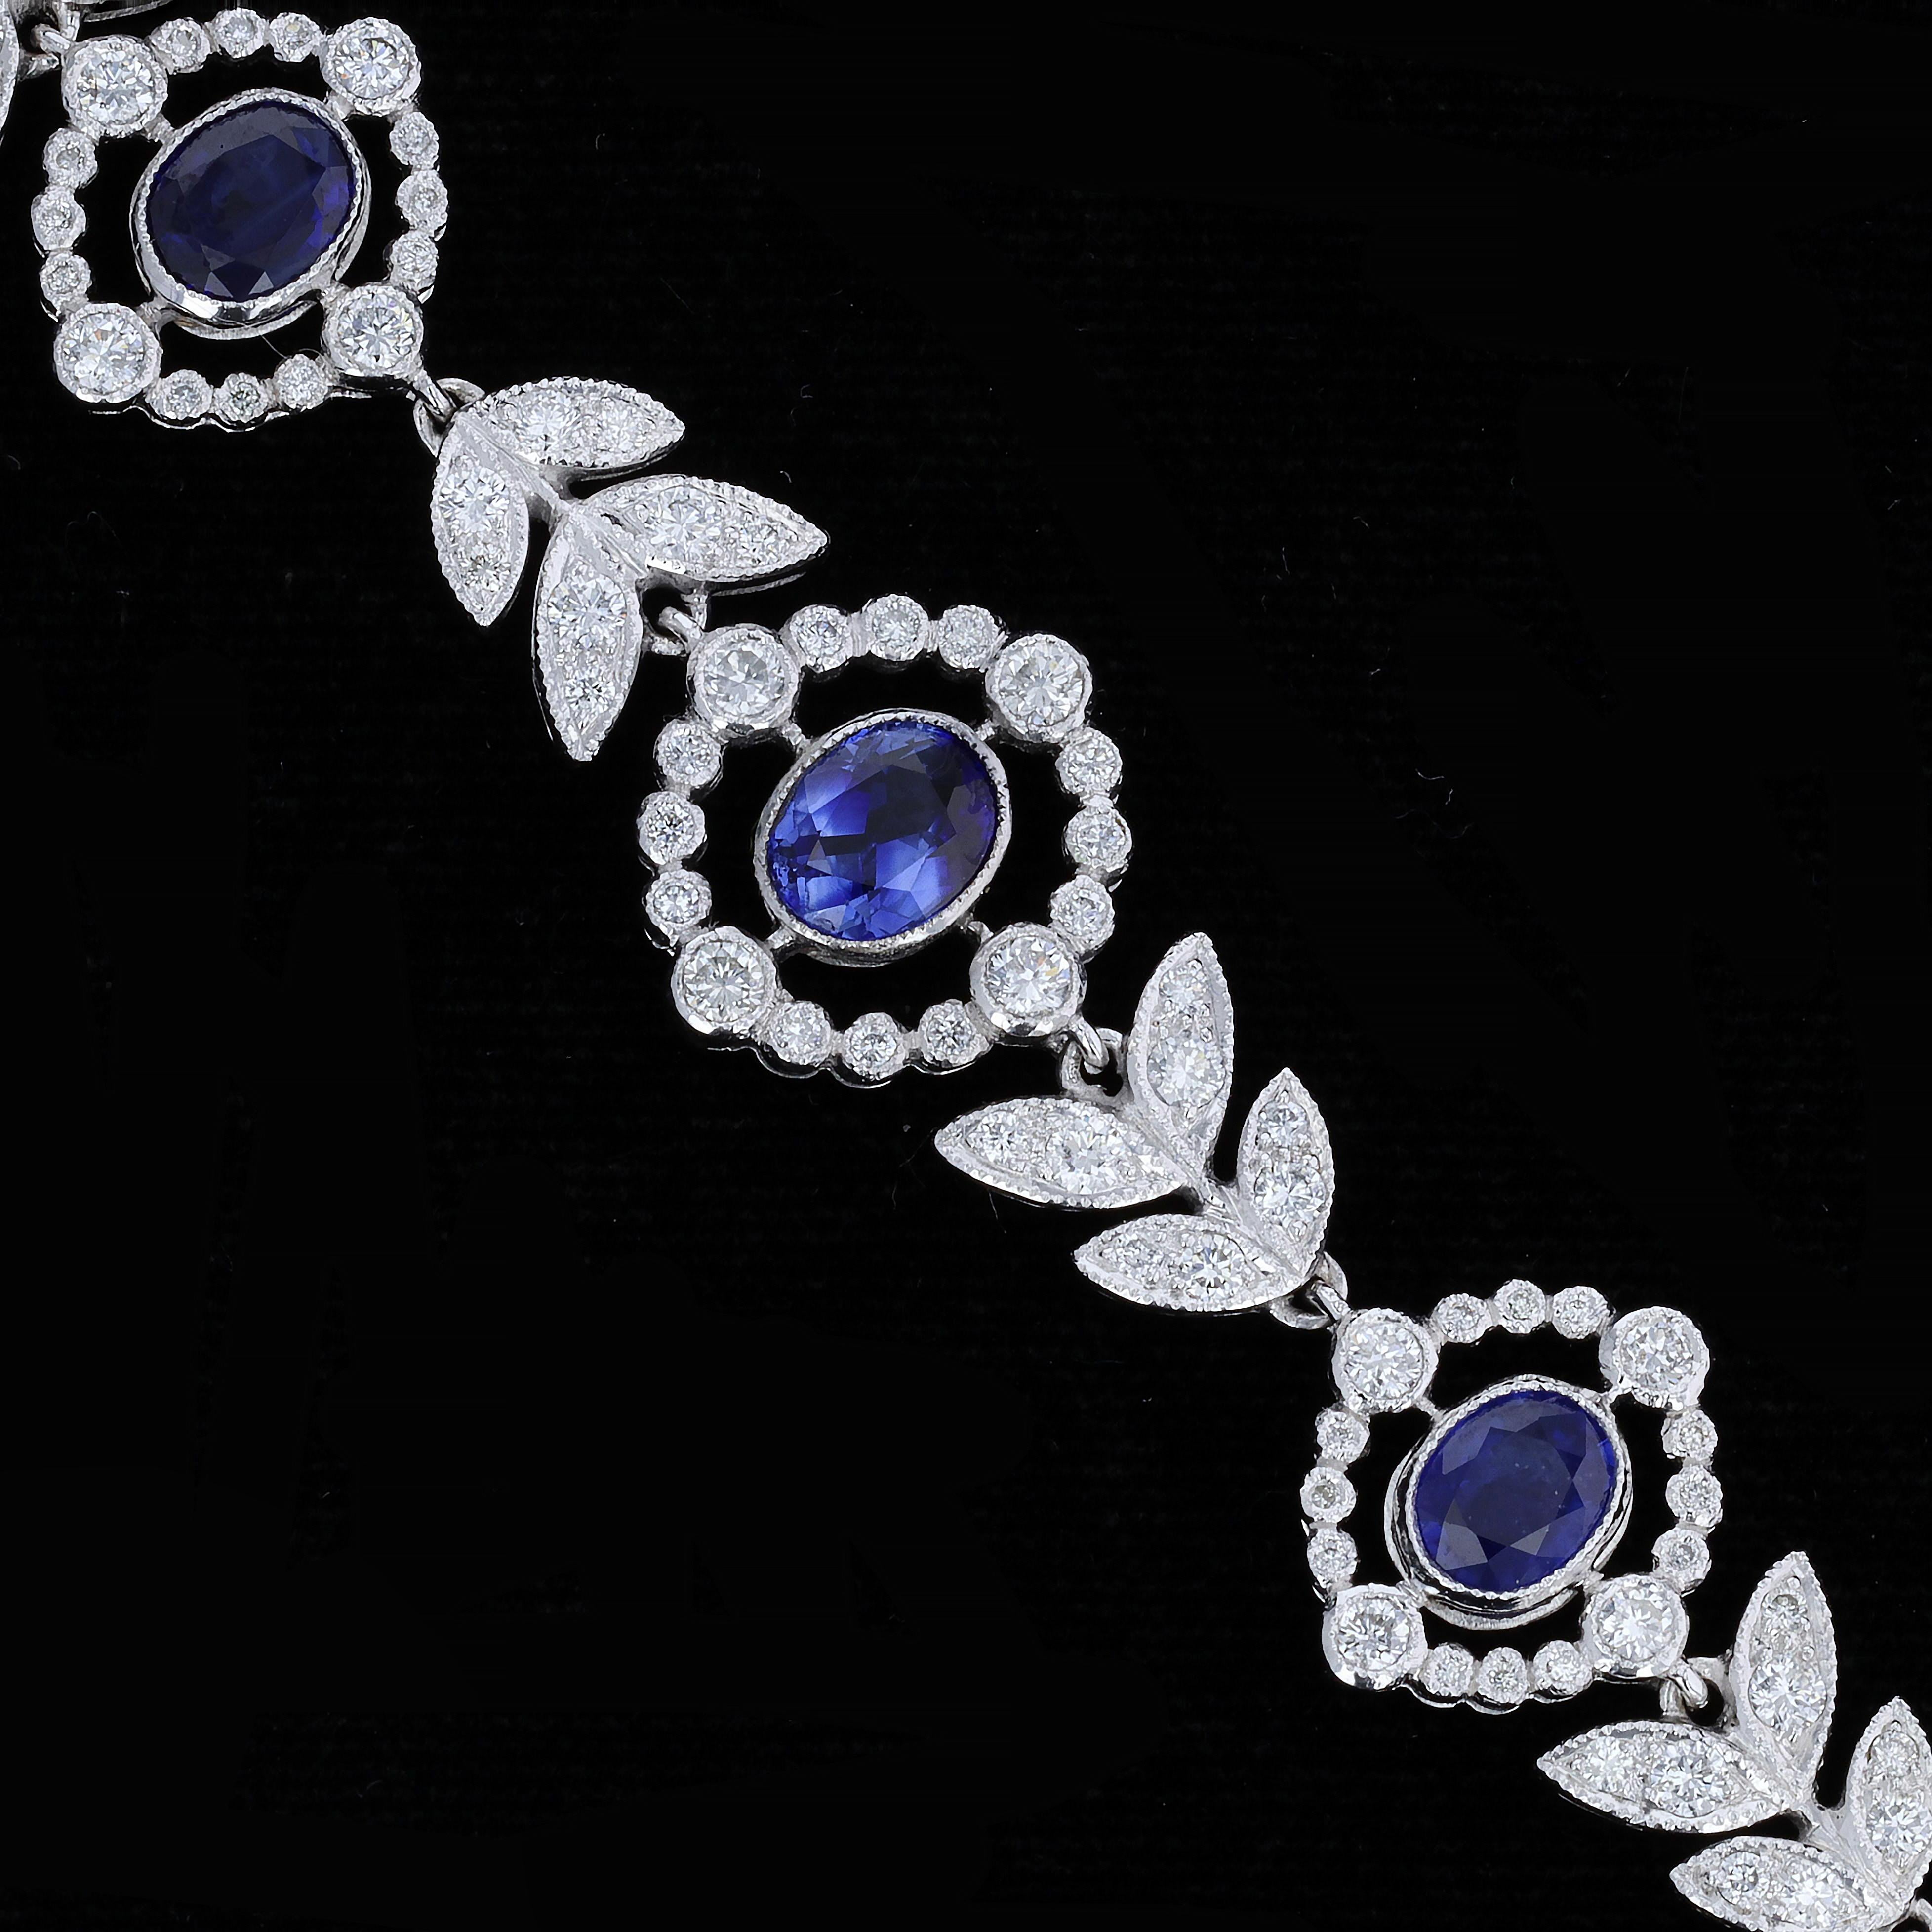 Captivate your heart and imagination with this vivid vintage sapphire and diamond bracelet. Nine oval cut 6.79 twt sapphires are accented with an array of round cut diamonds weighing 2.83 twt in this 18K white gold bracelet. The bracelet measures 7